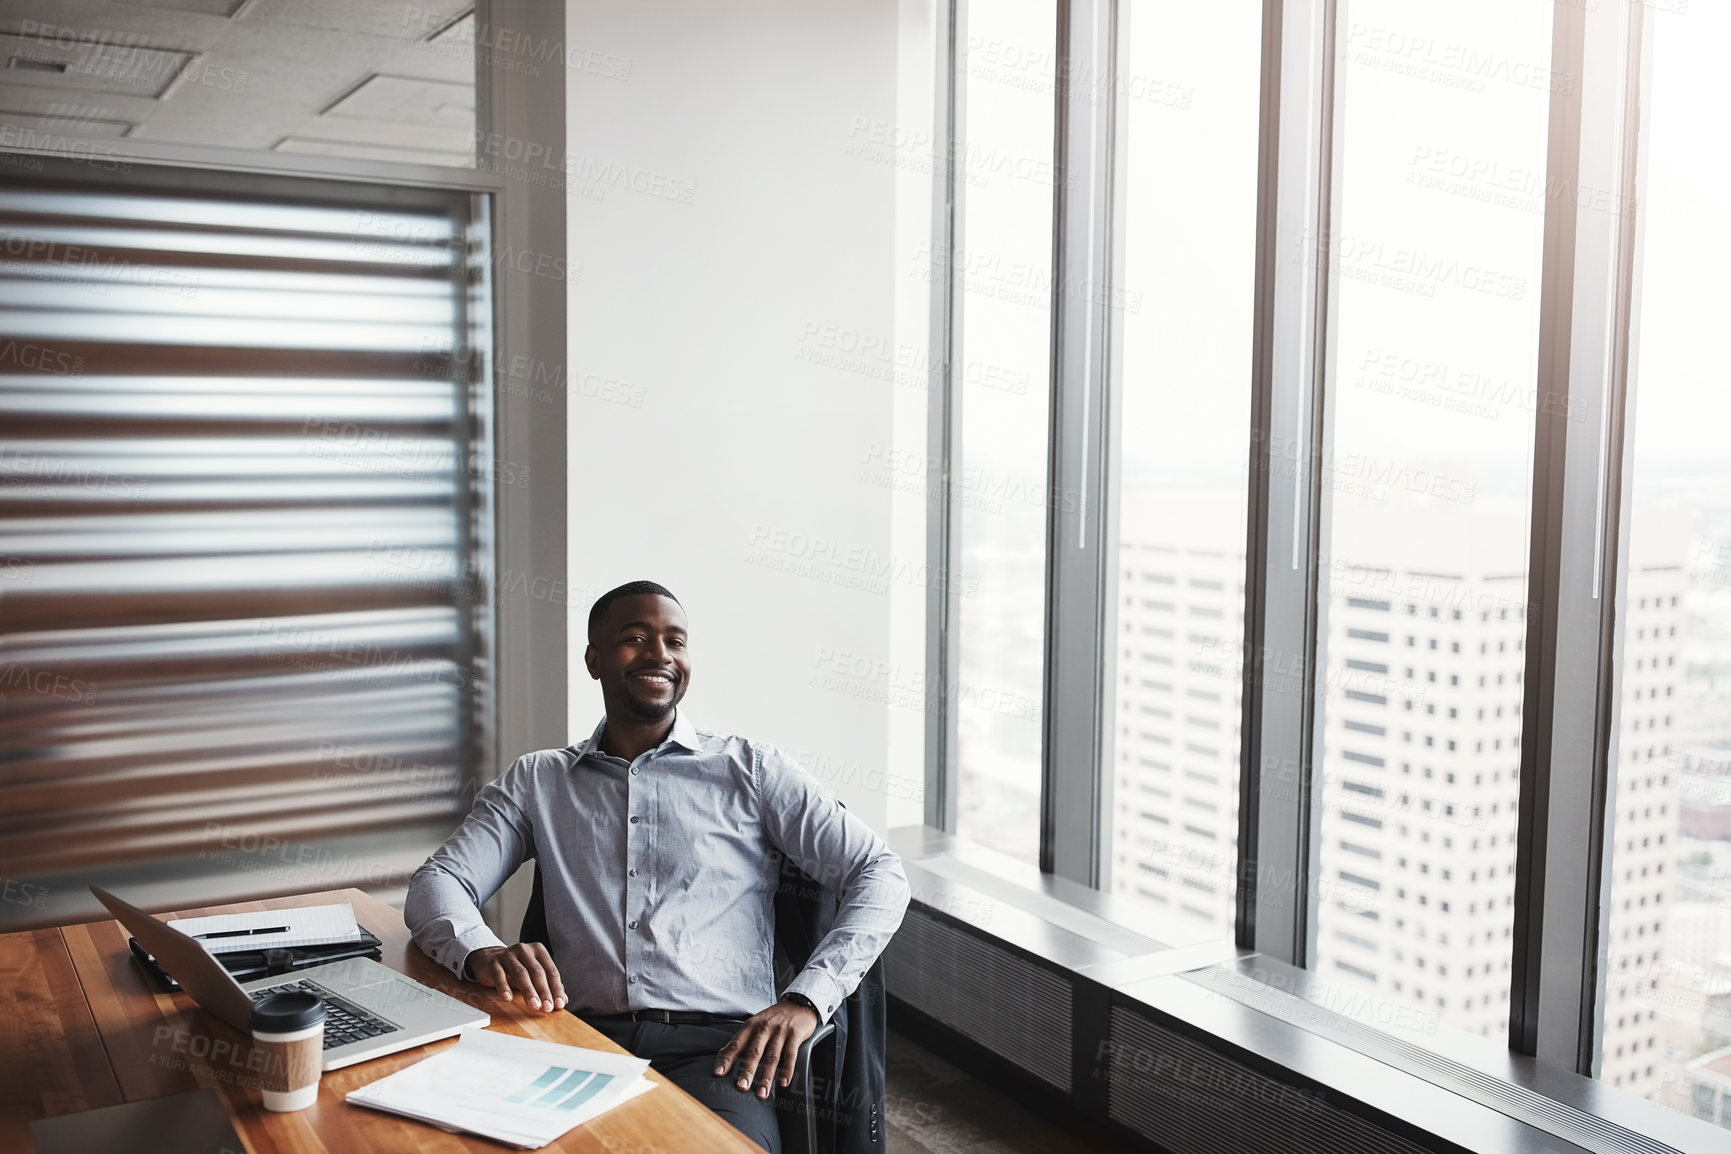 Buy stock photo High angle portrait of a handsome businessman working in his corporate office